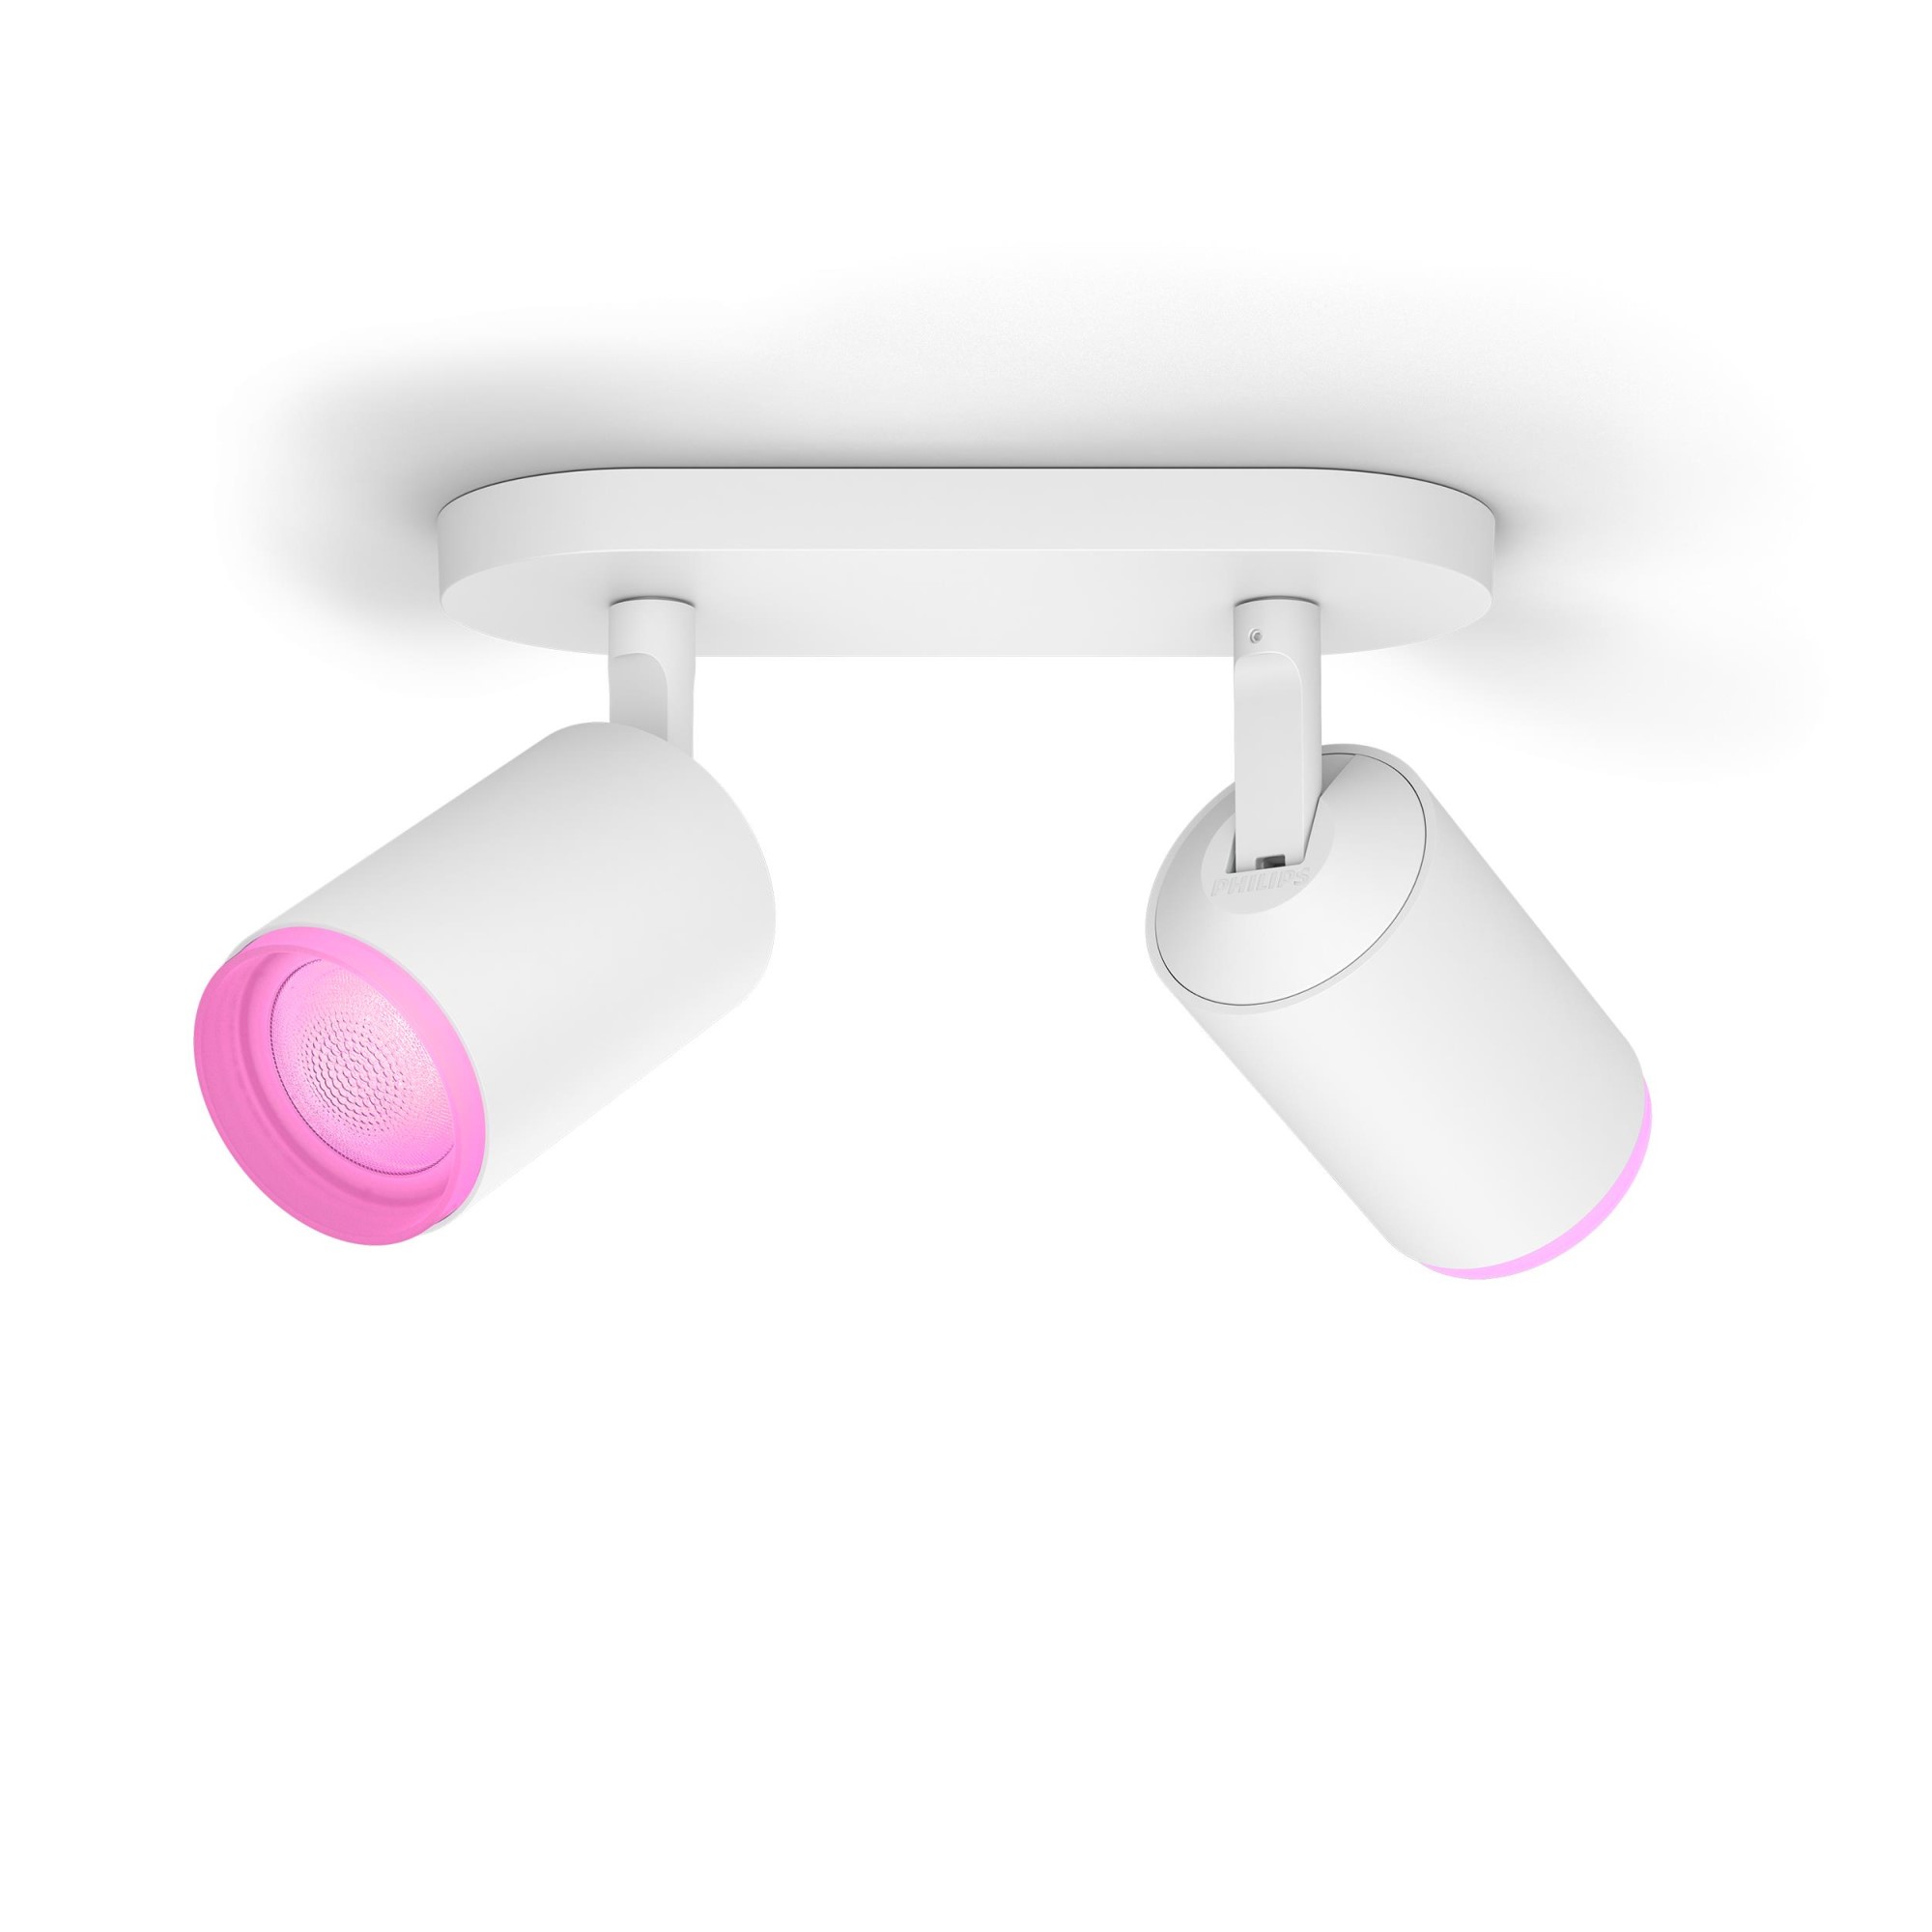 Lampa de perete Philips Hue alb and Color Ambiance Fugato LED Spot Double-Flamed alb 2x 350lm